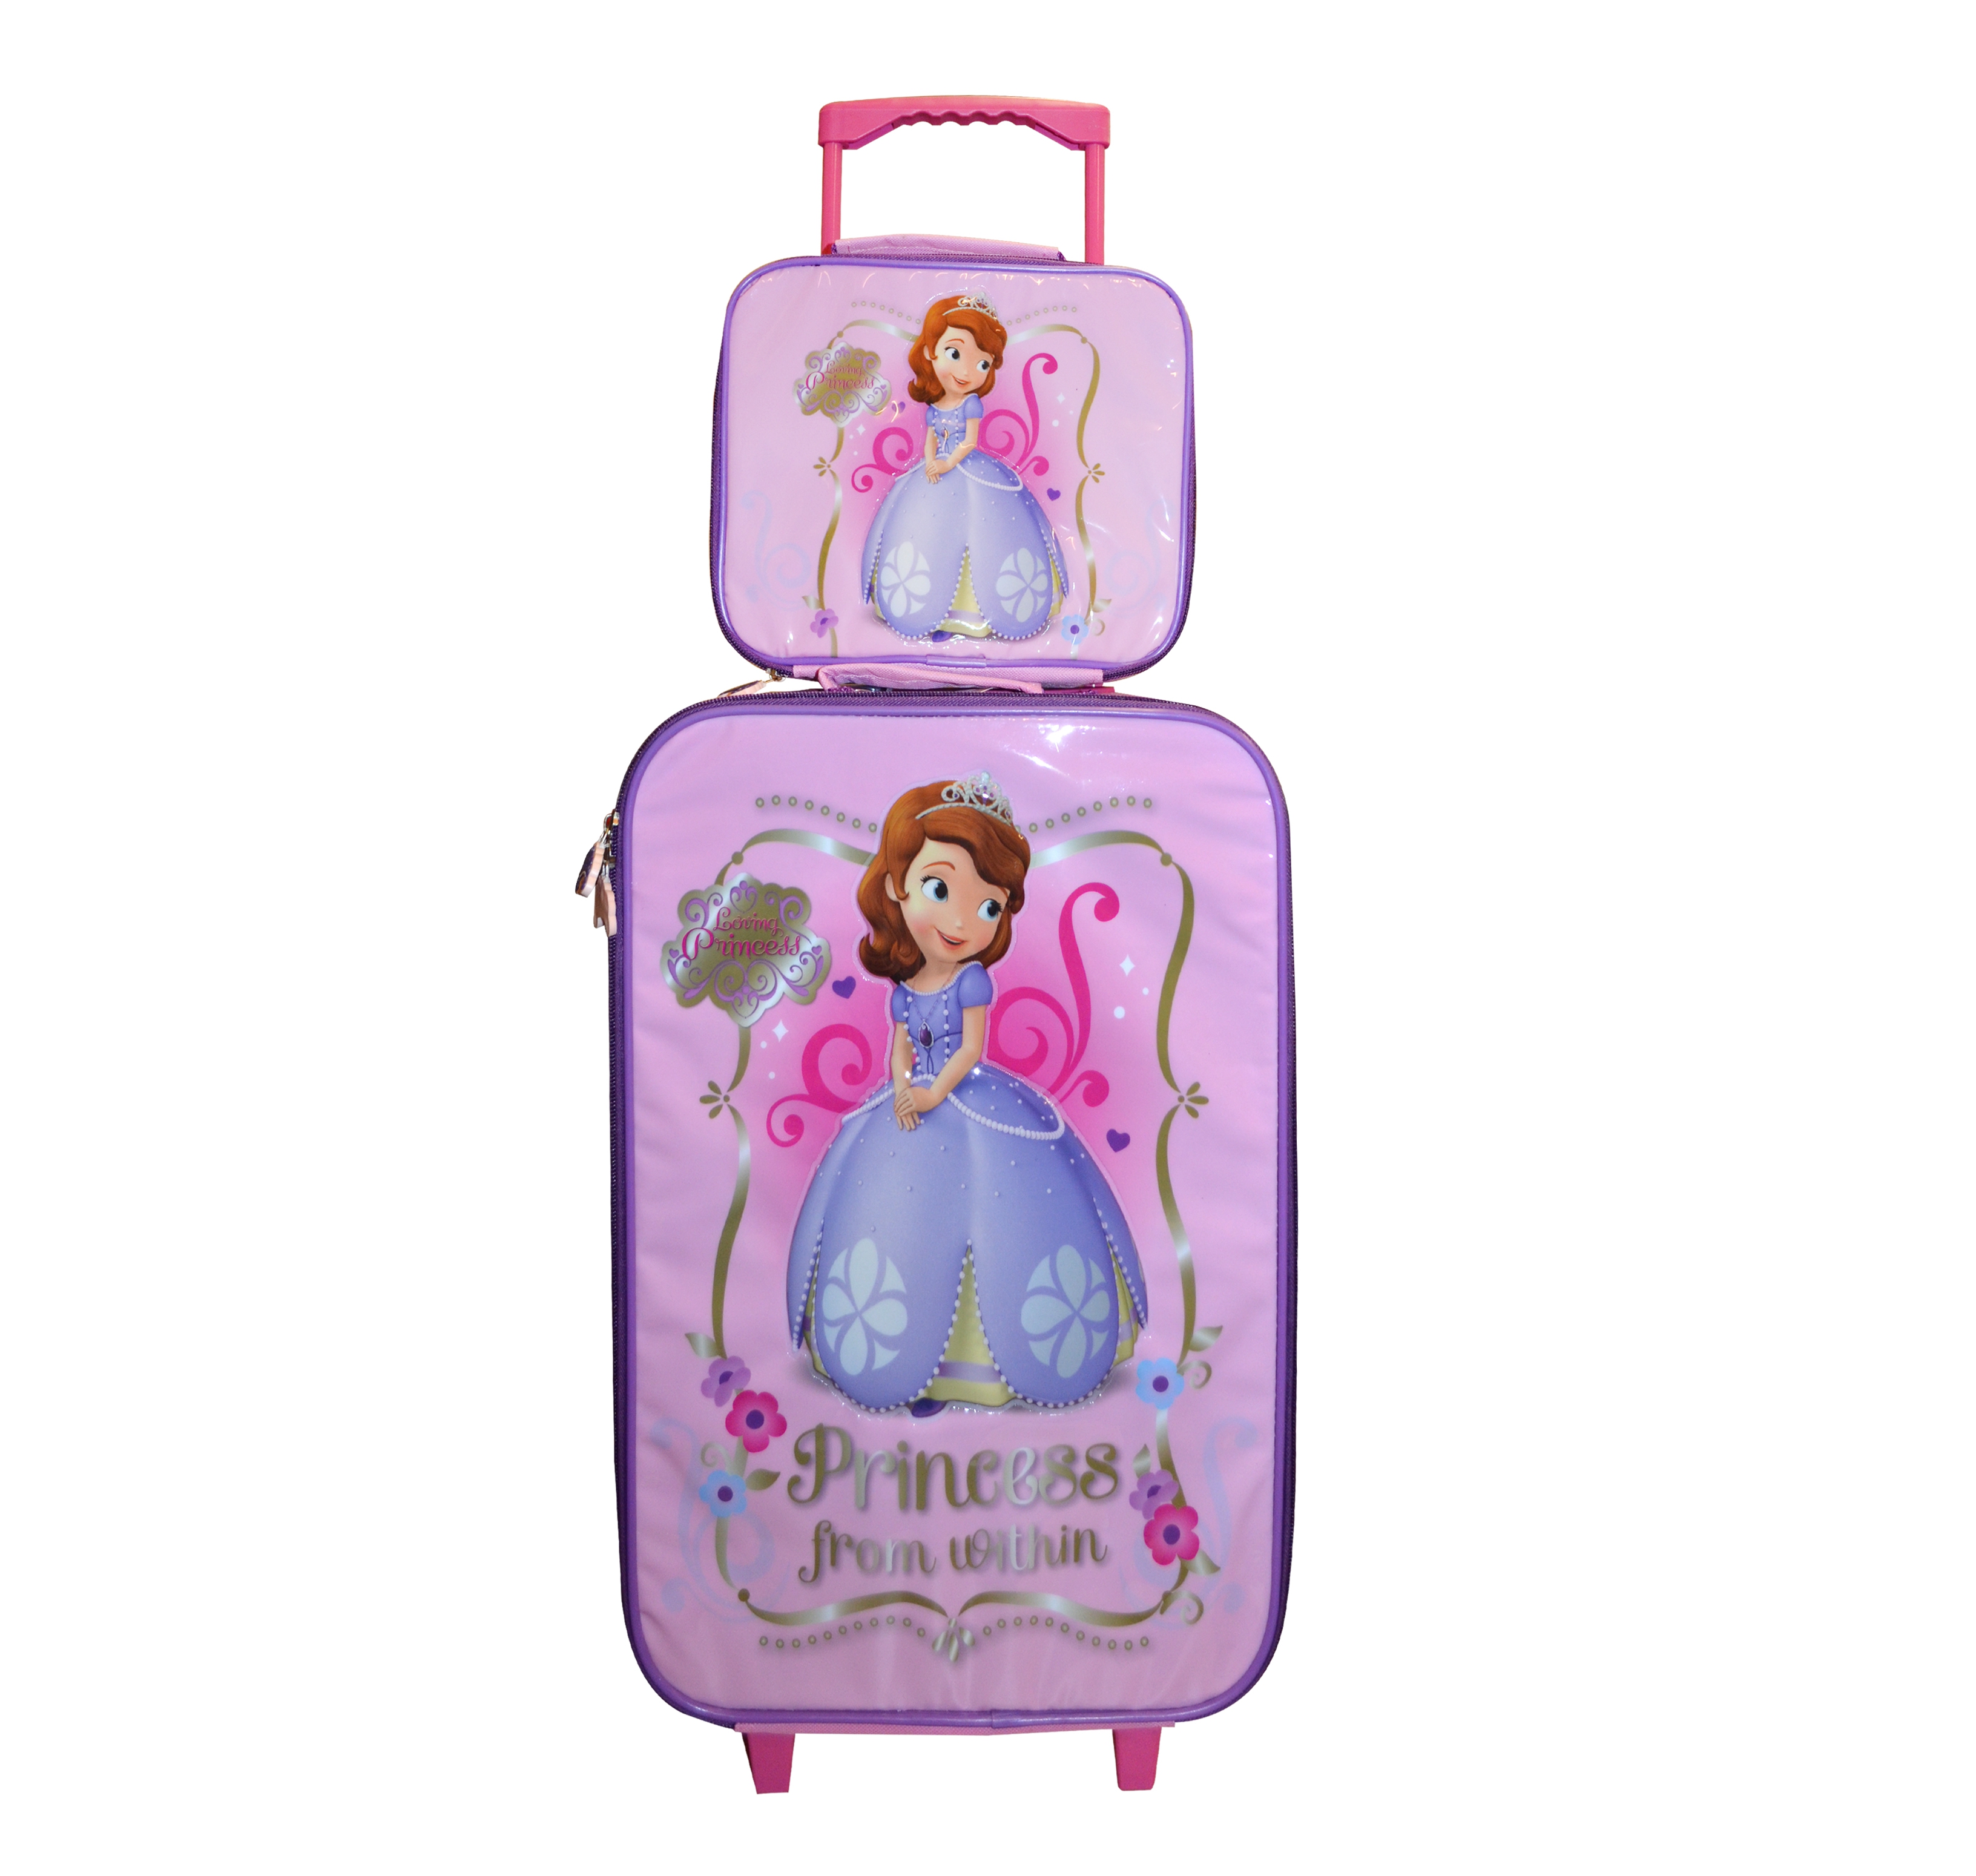 Disney 'Sofia The First' 2 Piece Suitcase with Lunch Bag Luggage Set